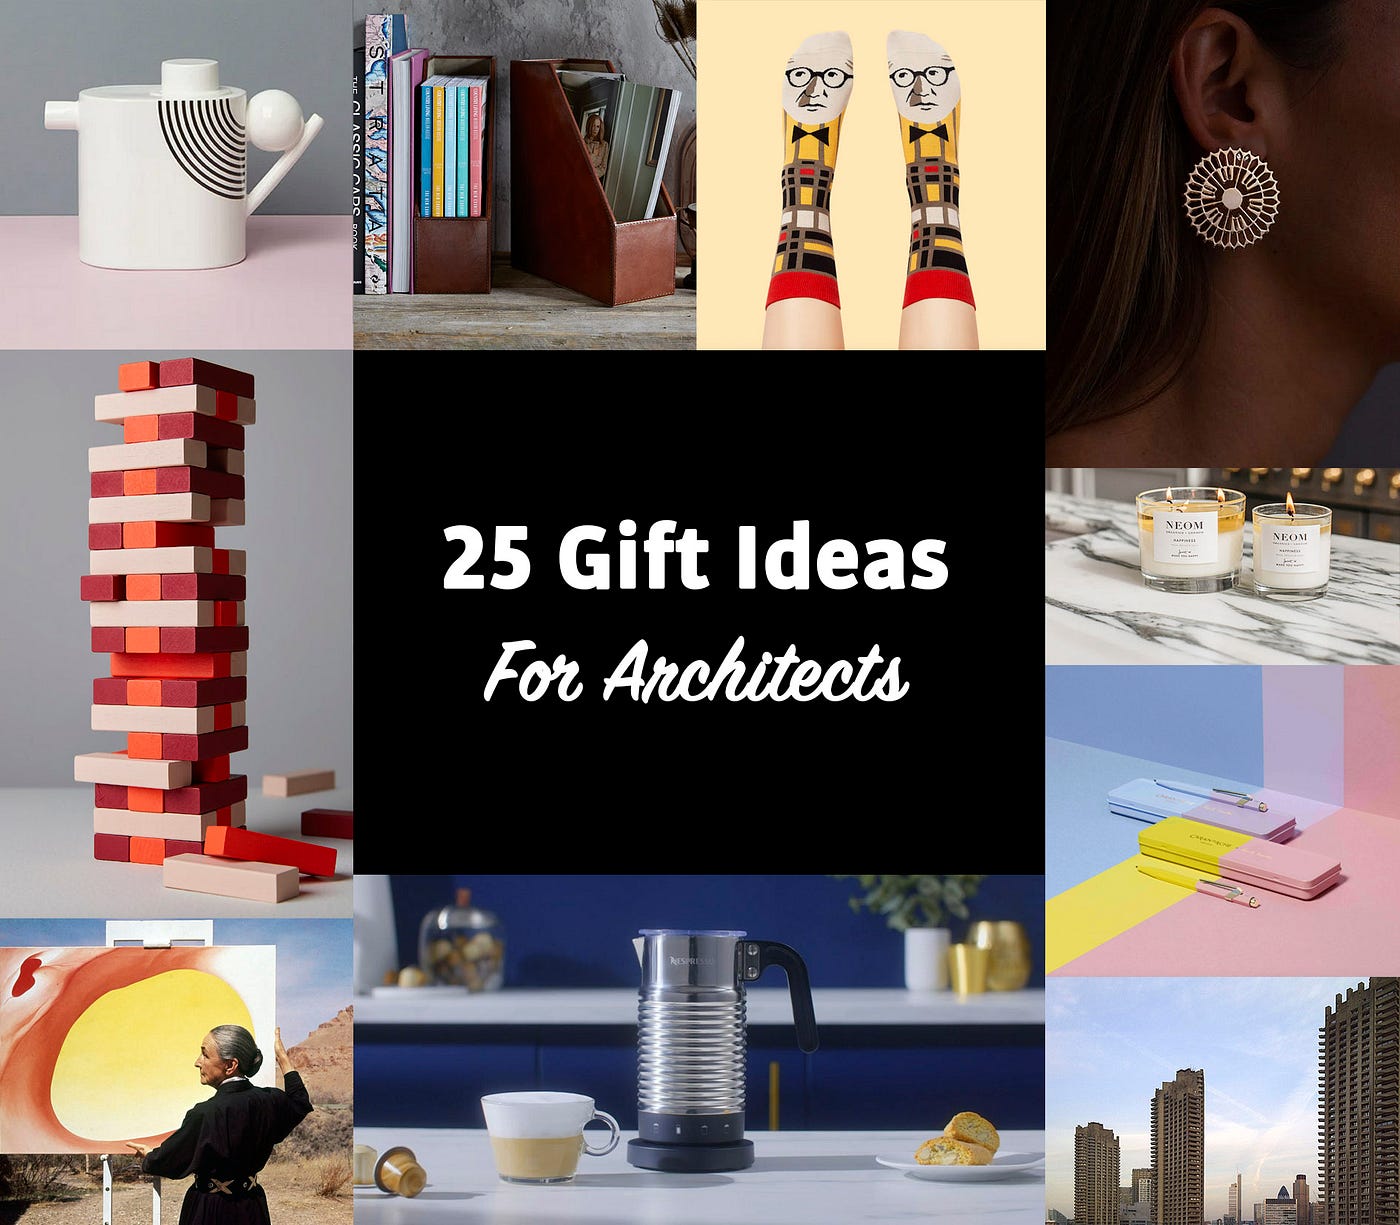 10 Affordable Gift Ideas for Architecture Lovers